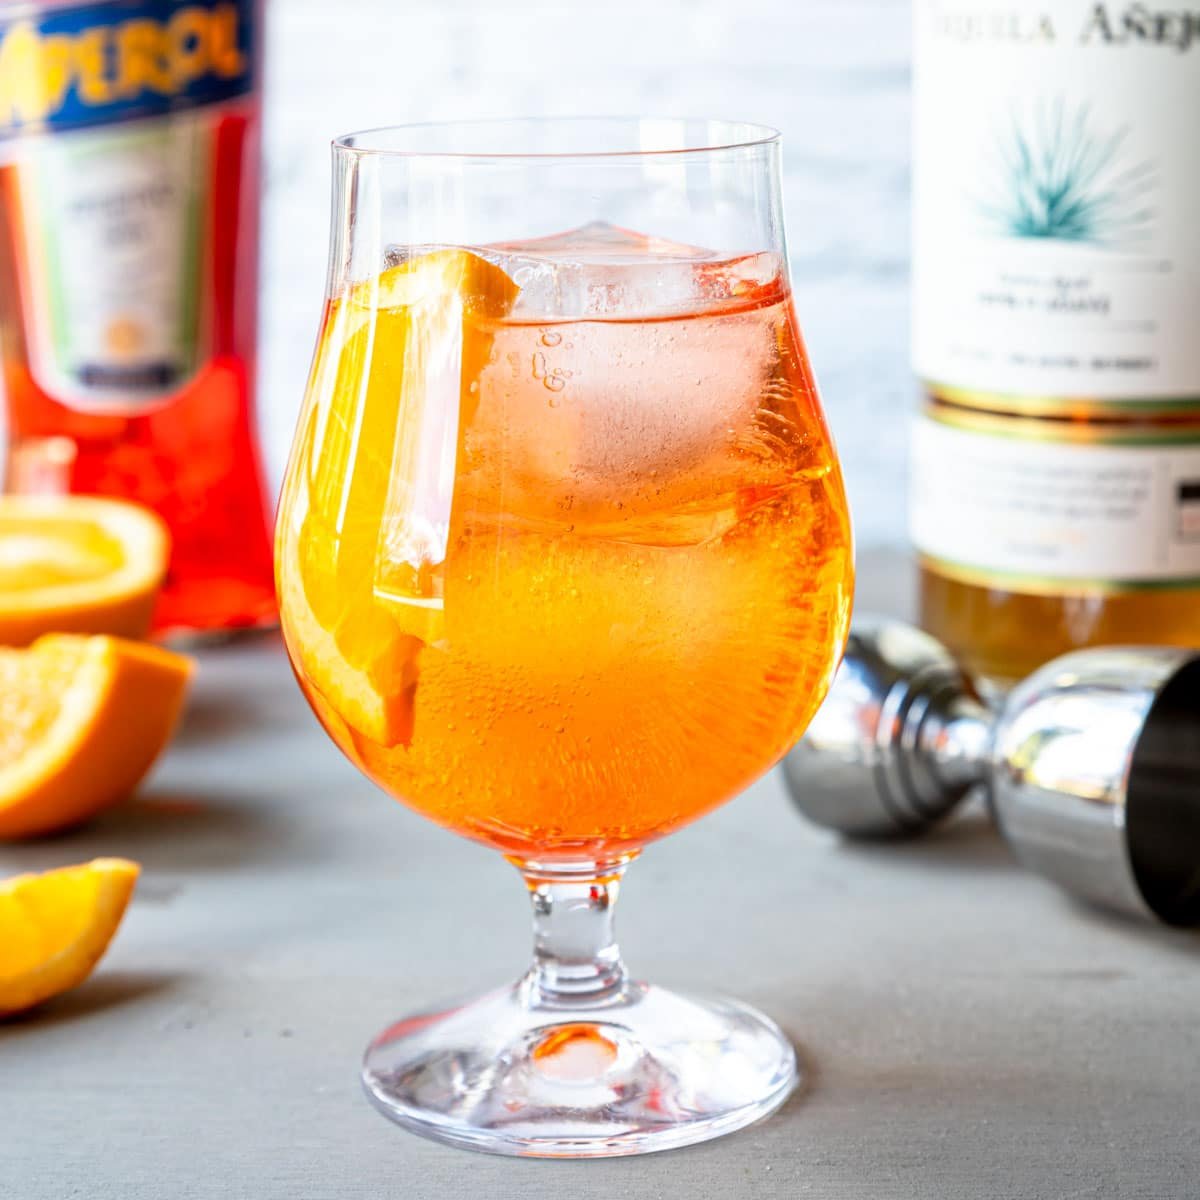 Aperol and Tequila in a glass with ice and topped with soda water, garnished with an orange